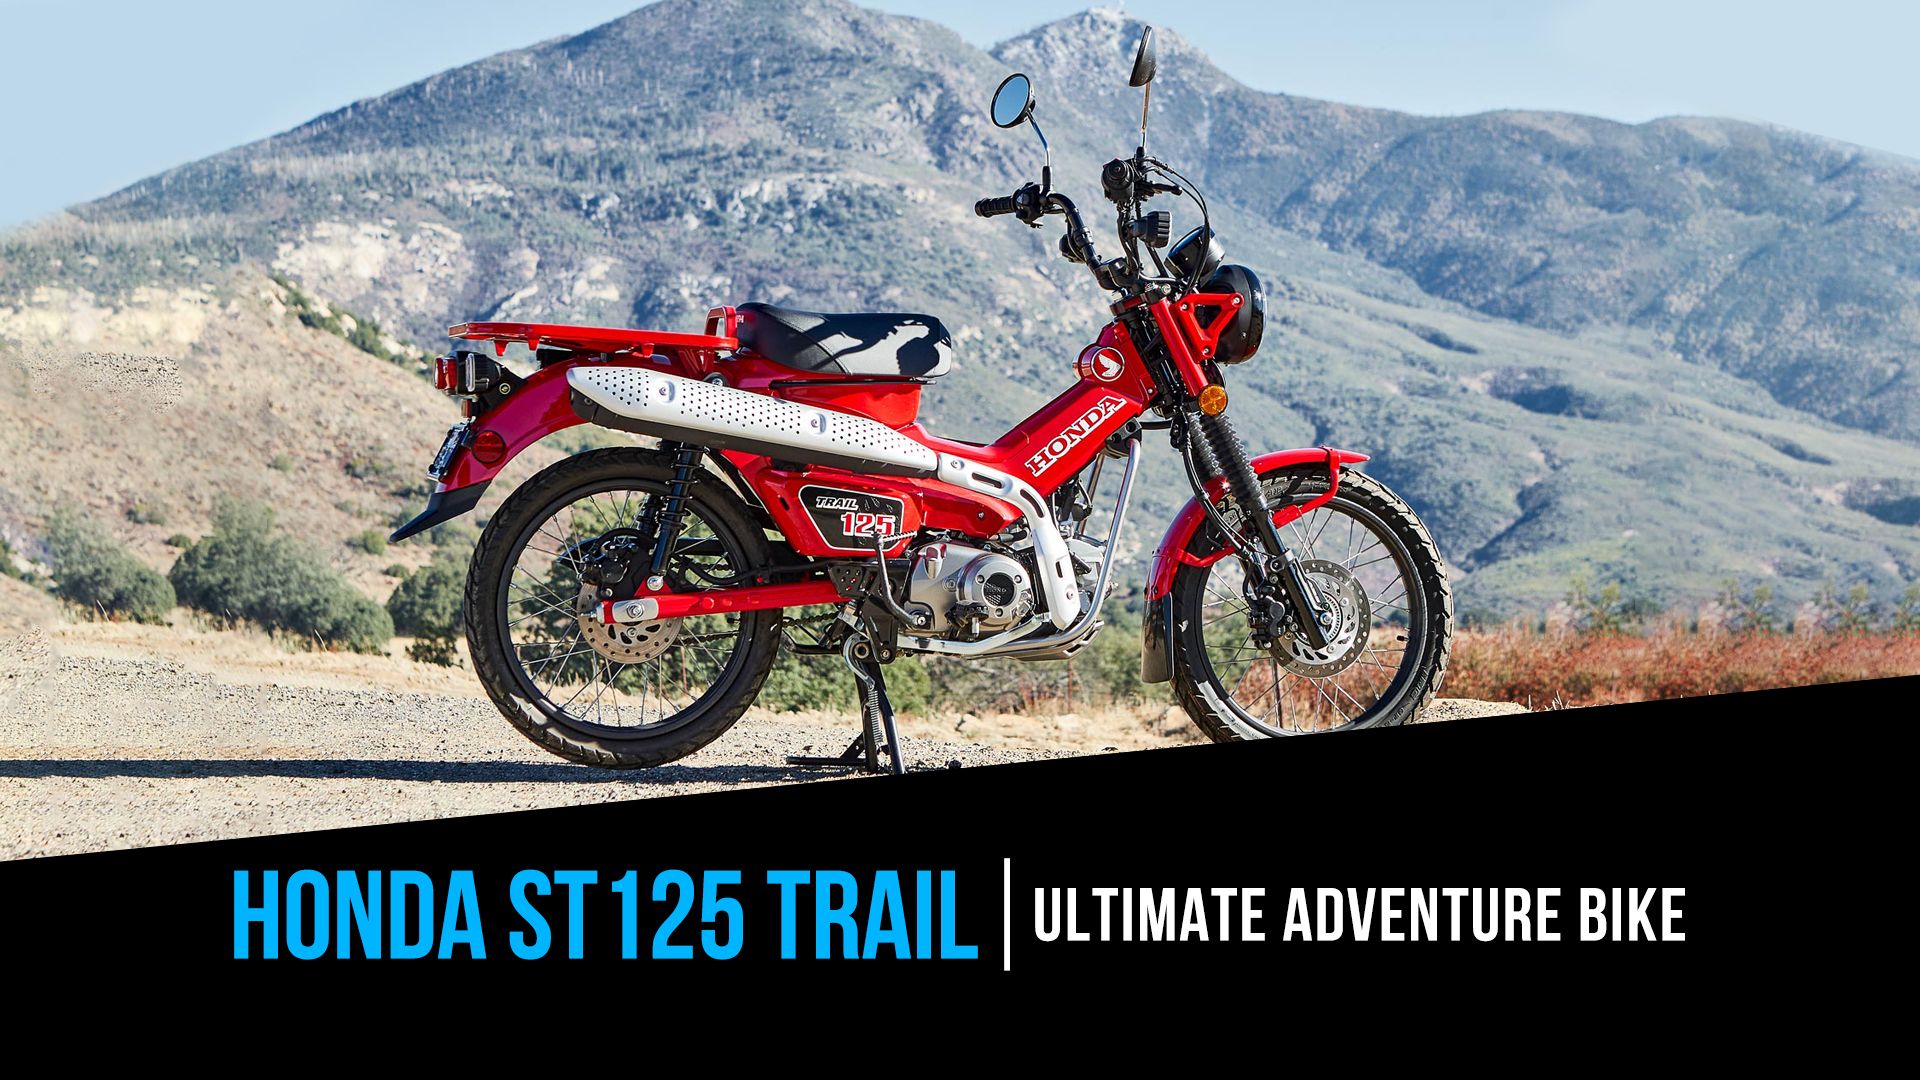 Why the Honda ST125 Trail Is the Ultimate Adventure Bike